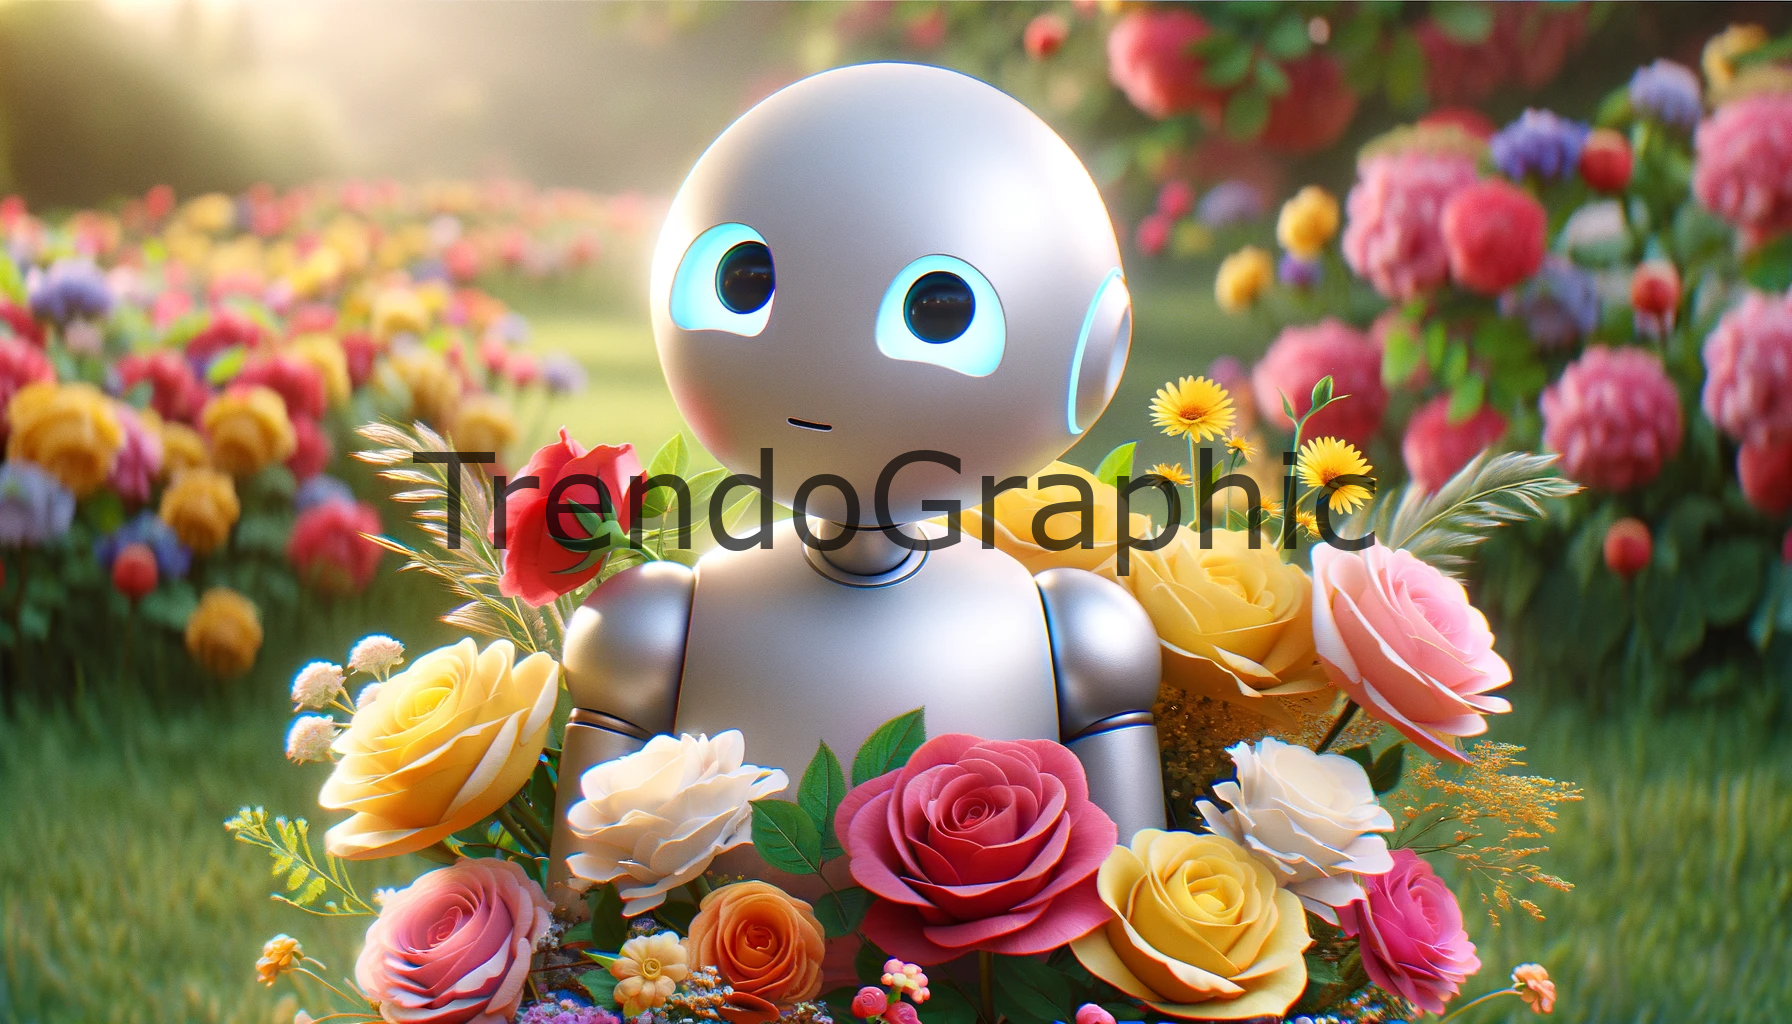 Robotic Harmony: Whimsical Robot Amidst a Floral Paradise